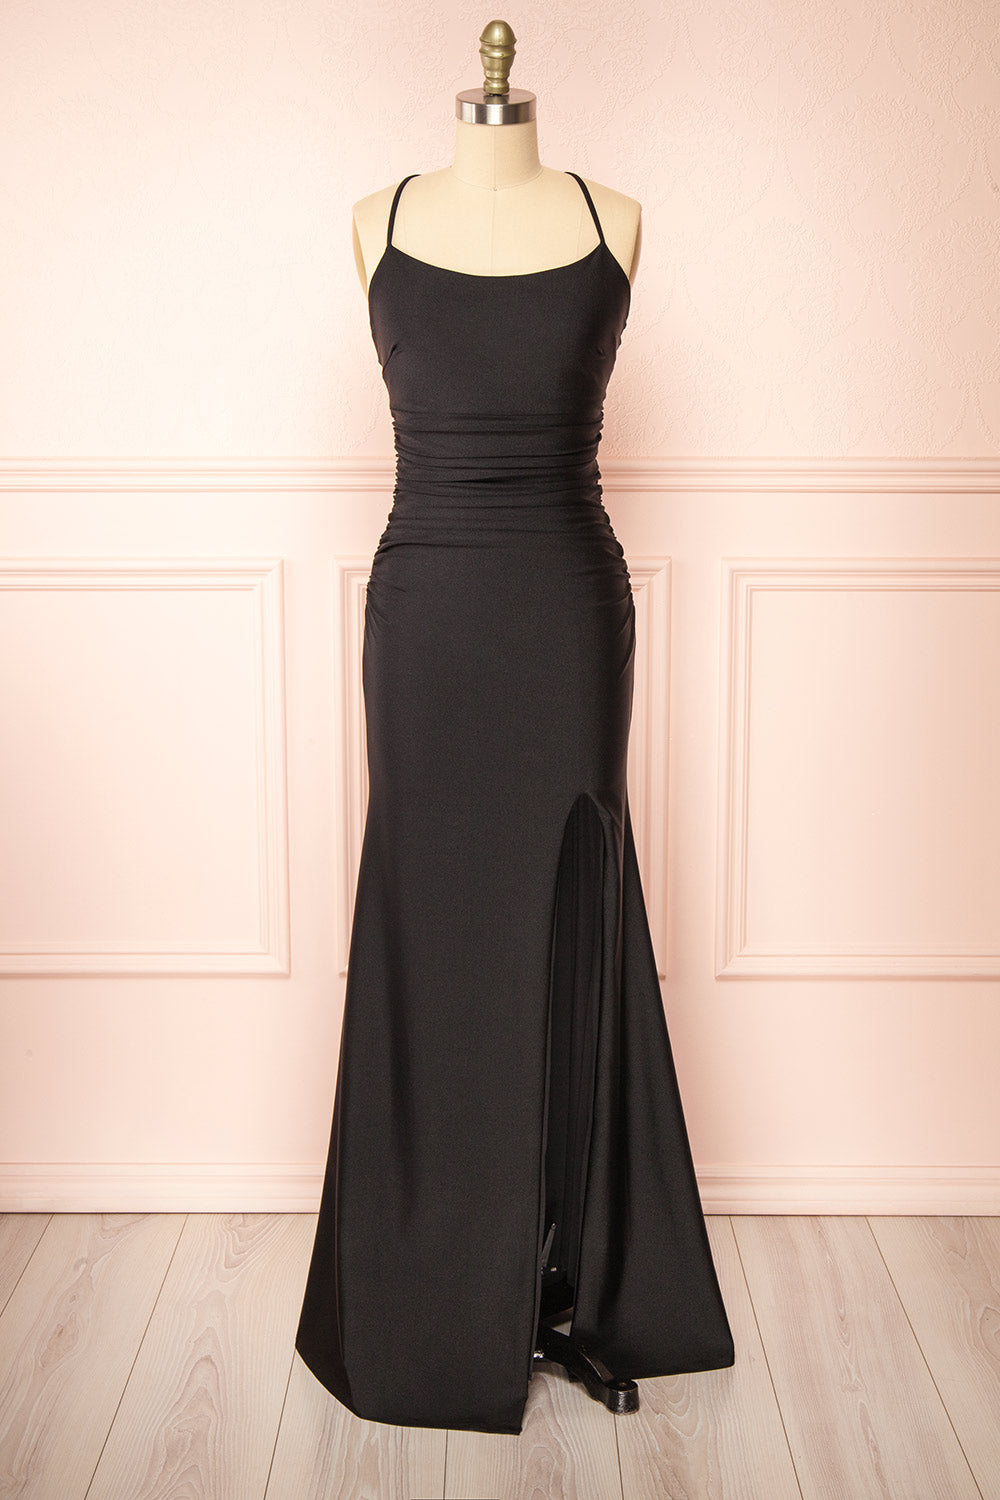 Sonia Black Backless Mermaid Maxi Dress w/ Slit | Boutique 1861 front view